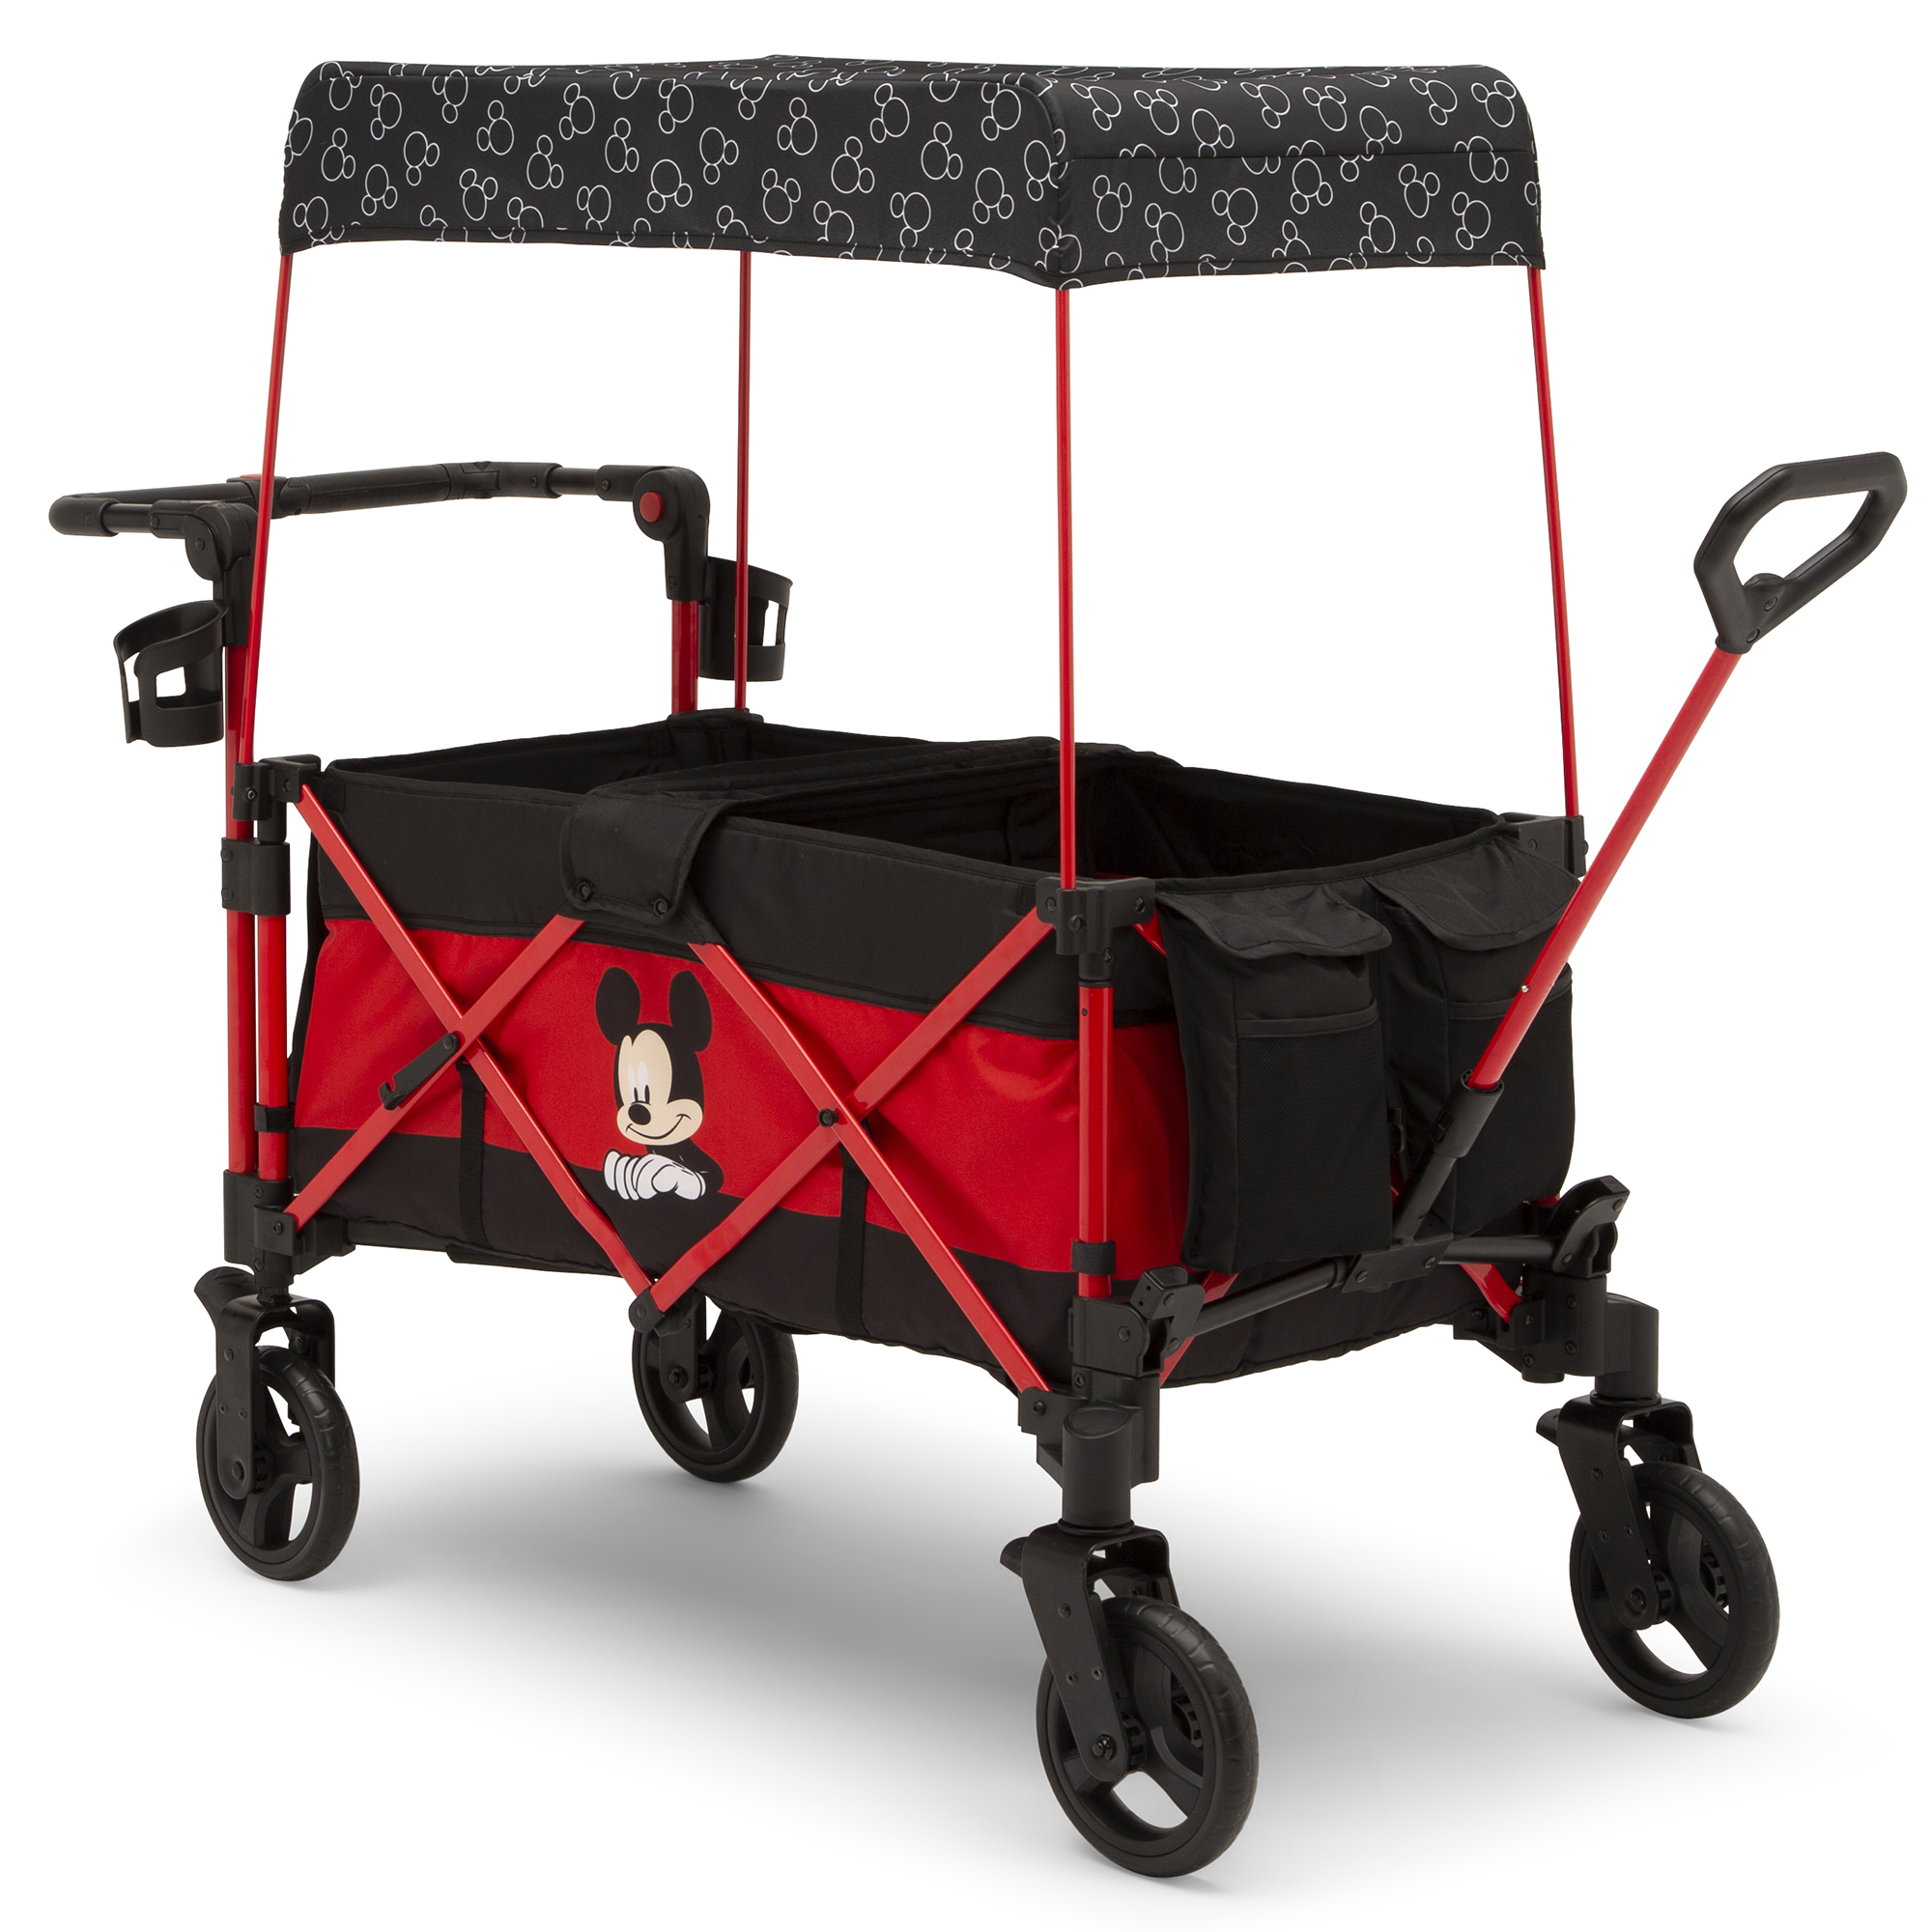 Disney Mickey Mouse Stroller Wagon by Delta Children - image 1 of 13